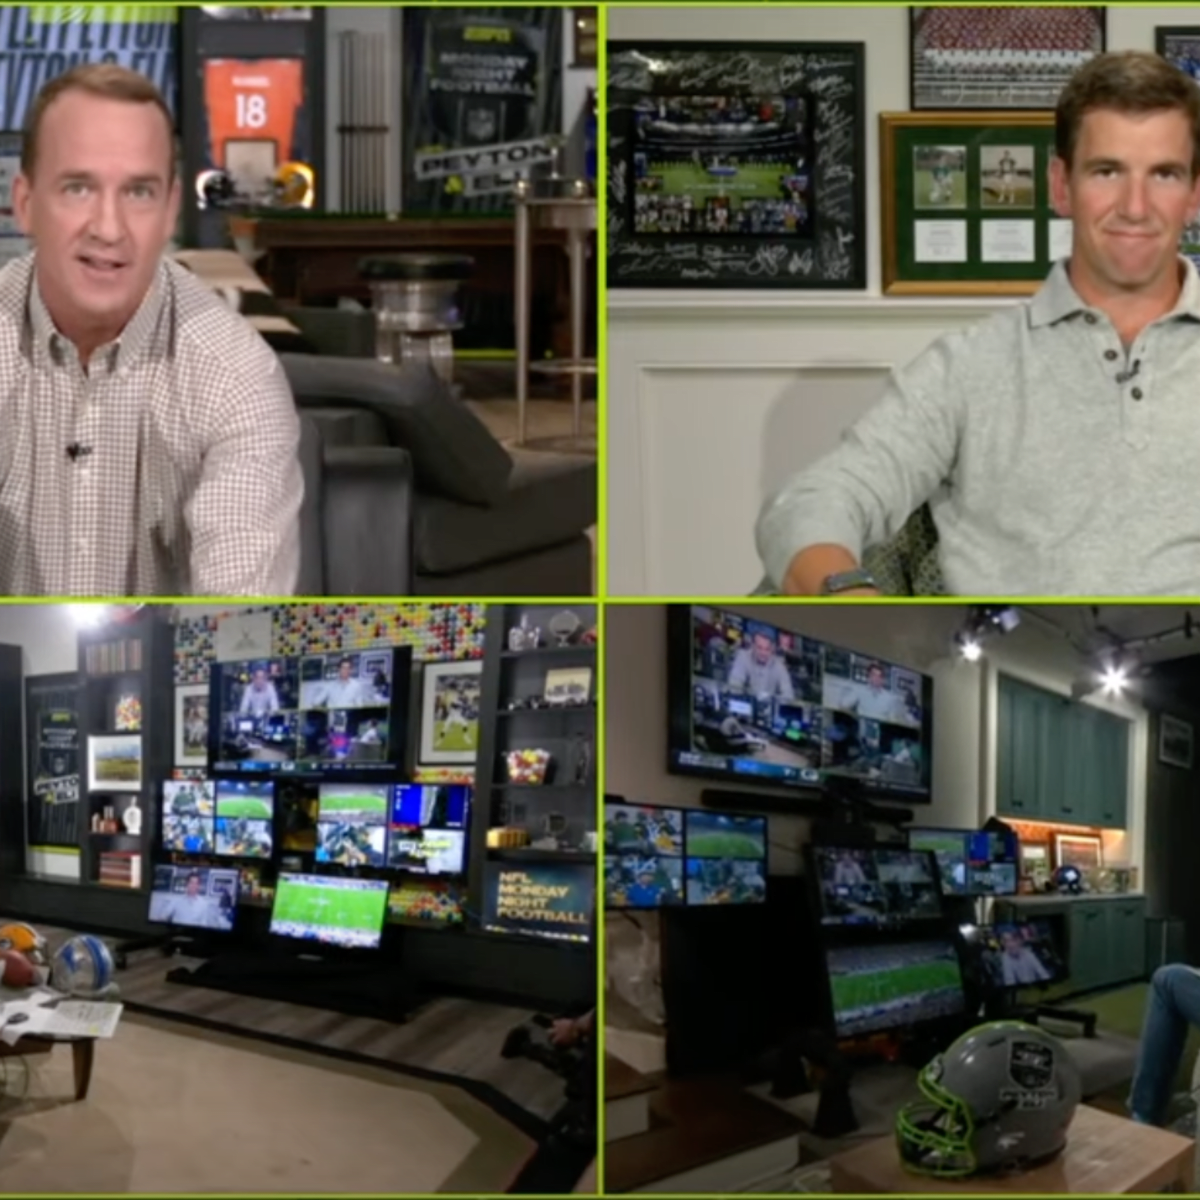 Is the Manningcast on tonight? Check out Eli and Peyton Manning's